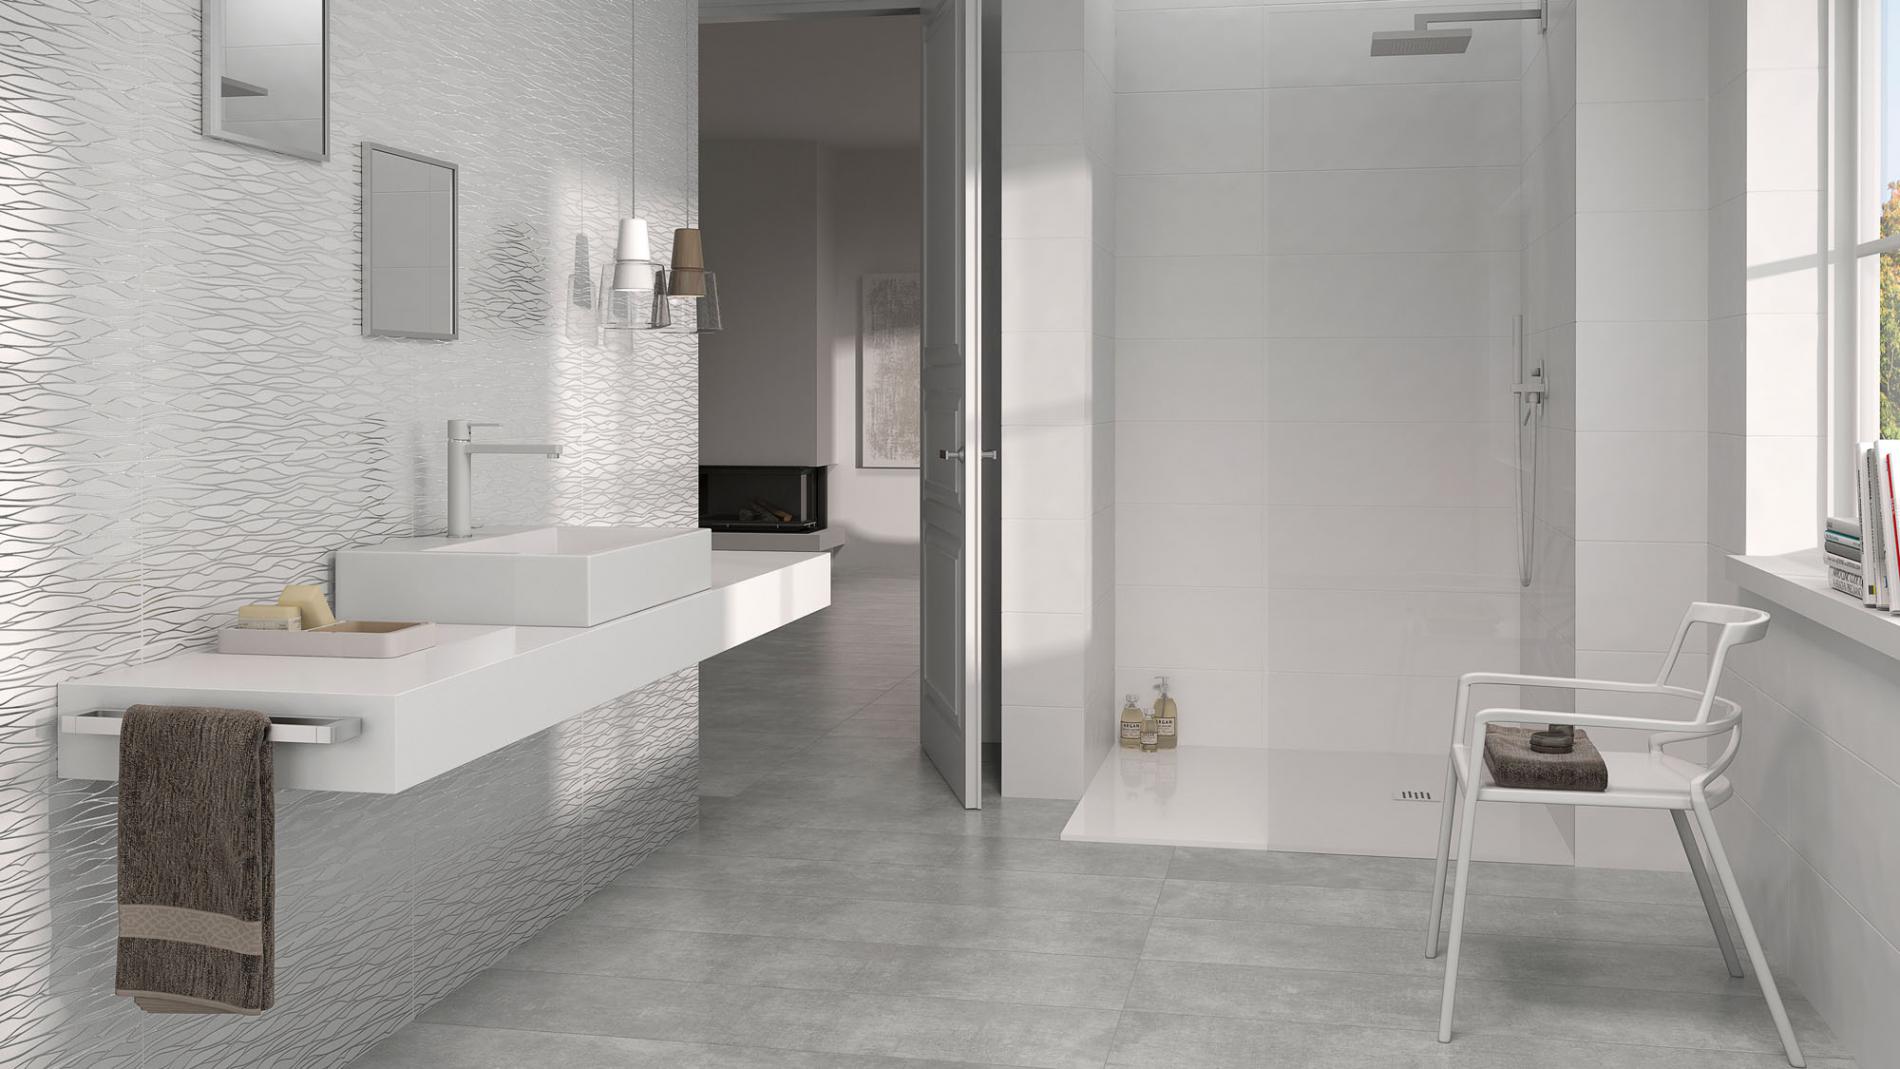 pam1900x311 Tiles dublin waterloo bathrooms commercial contracts ireland supply and fit luxury.jpg